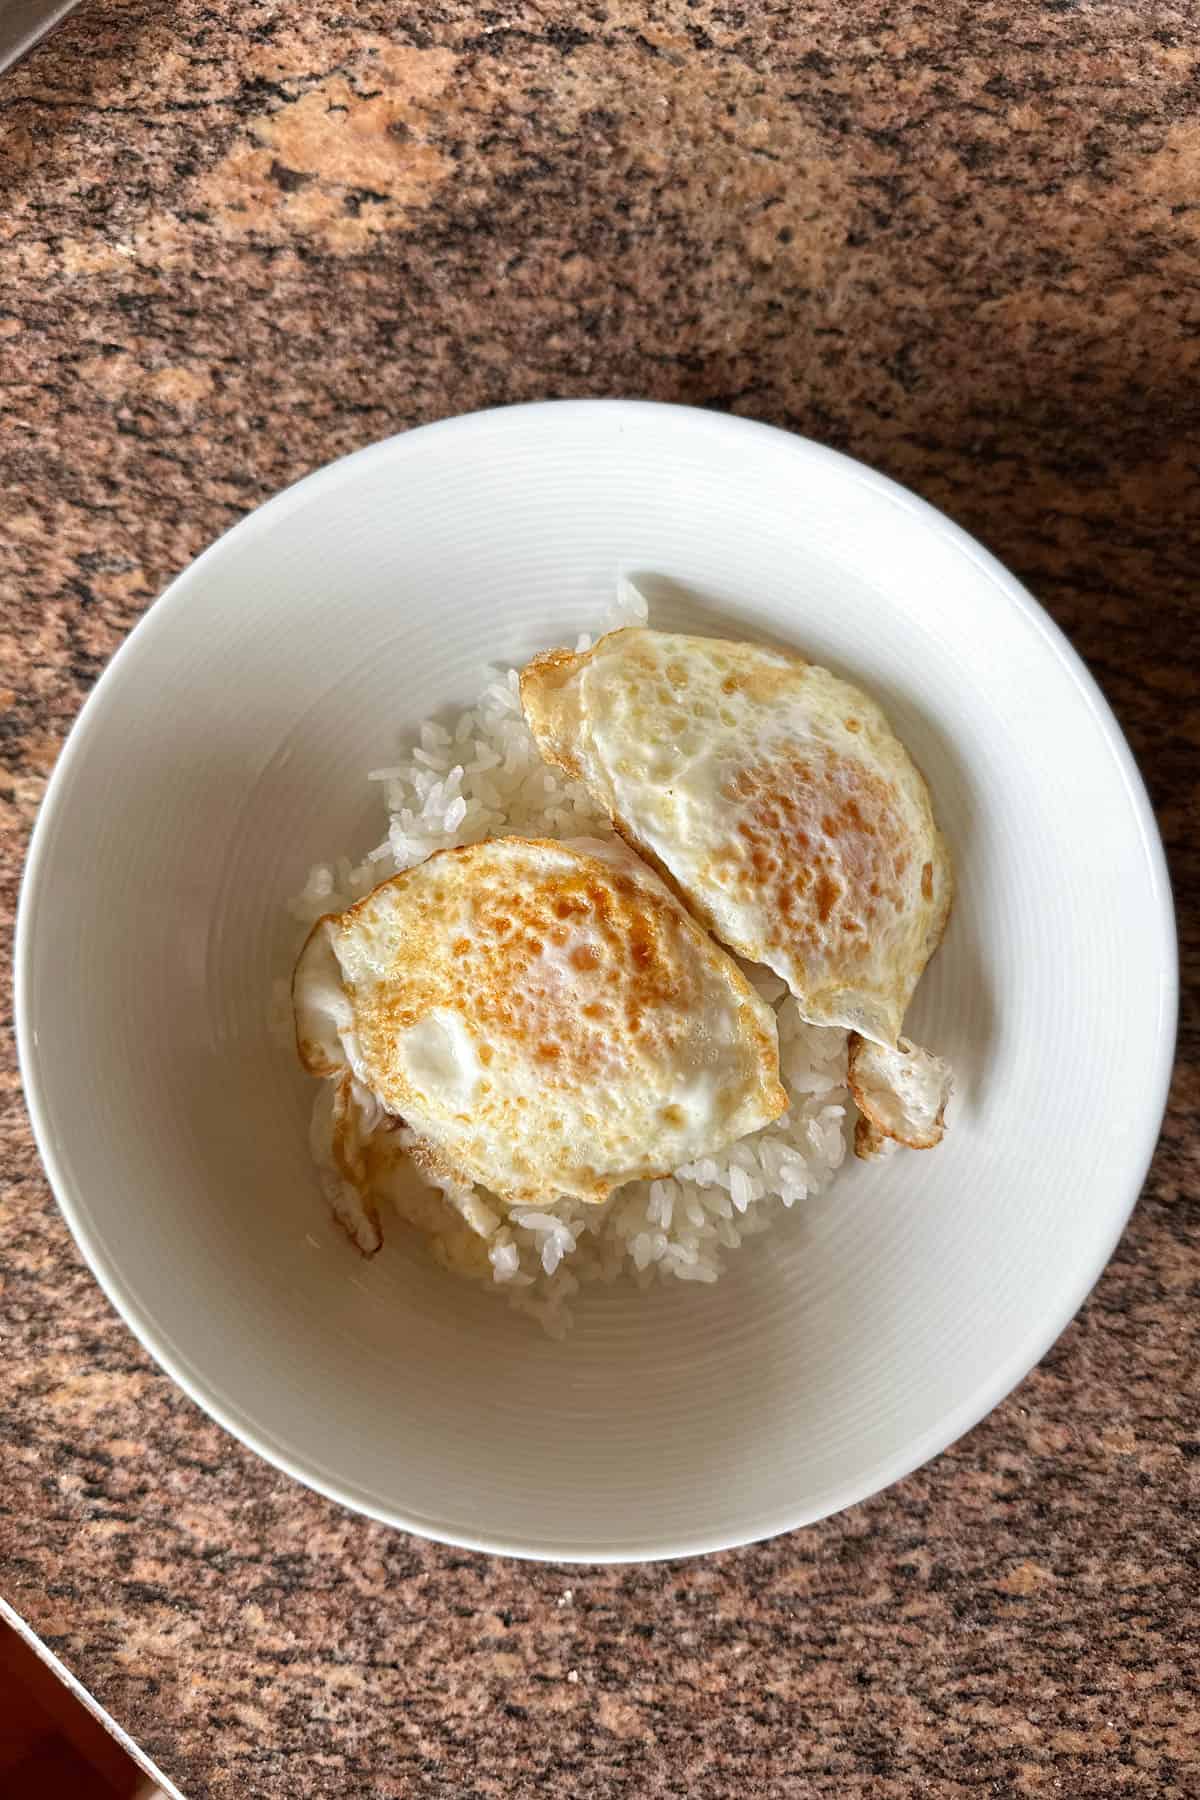 Over easy eggs on rice.